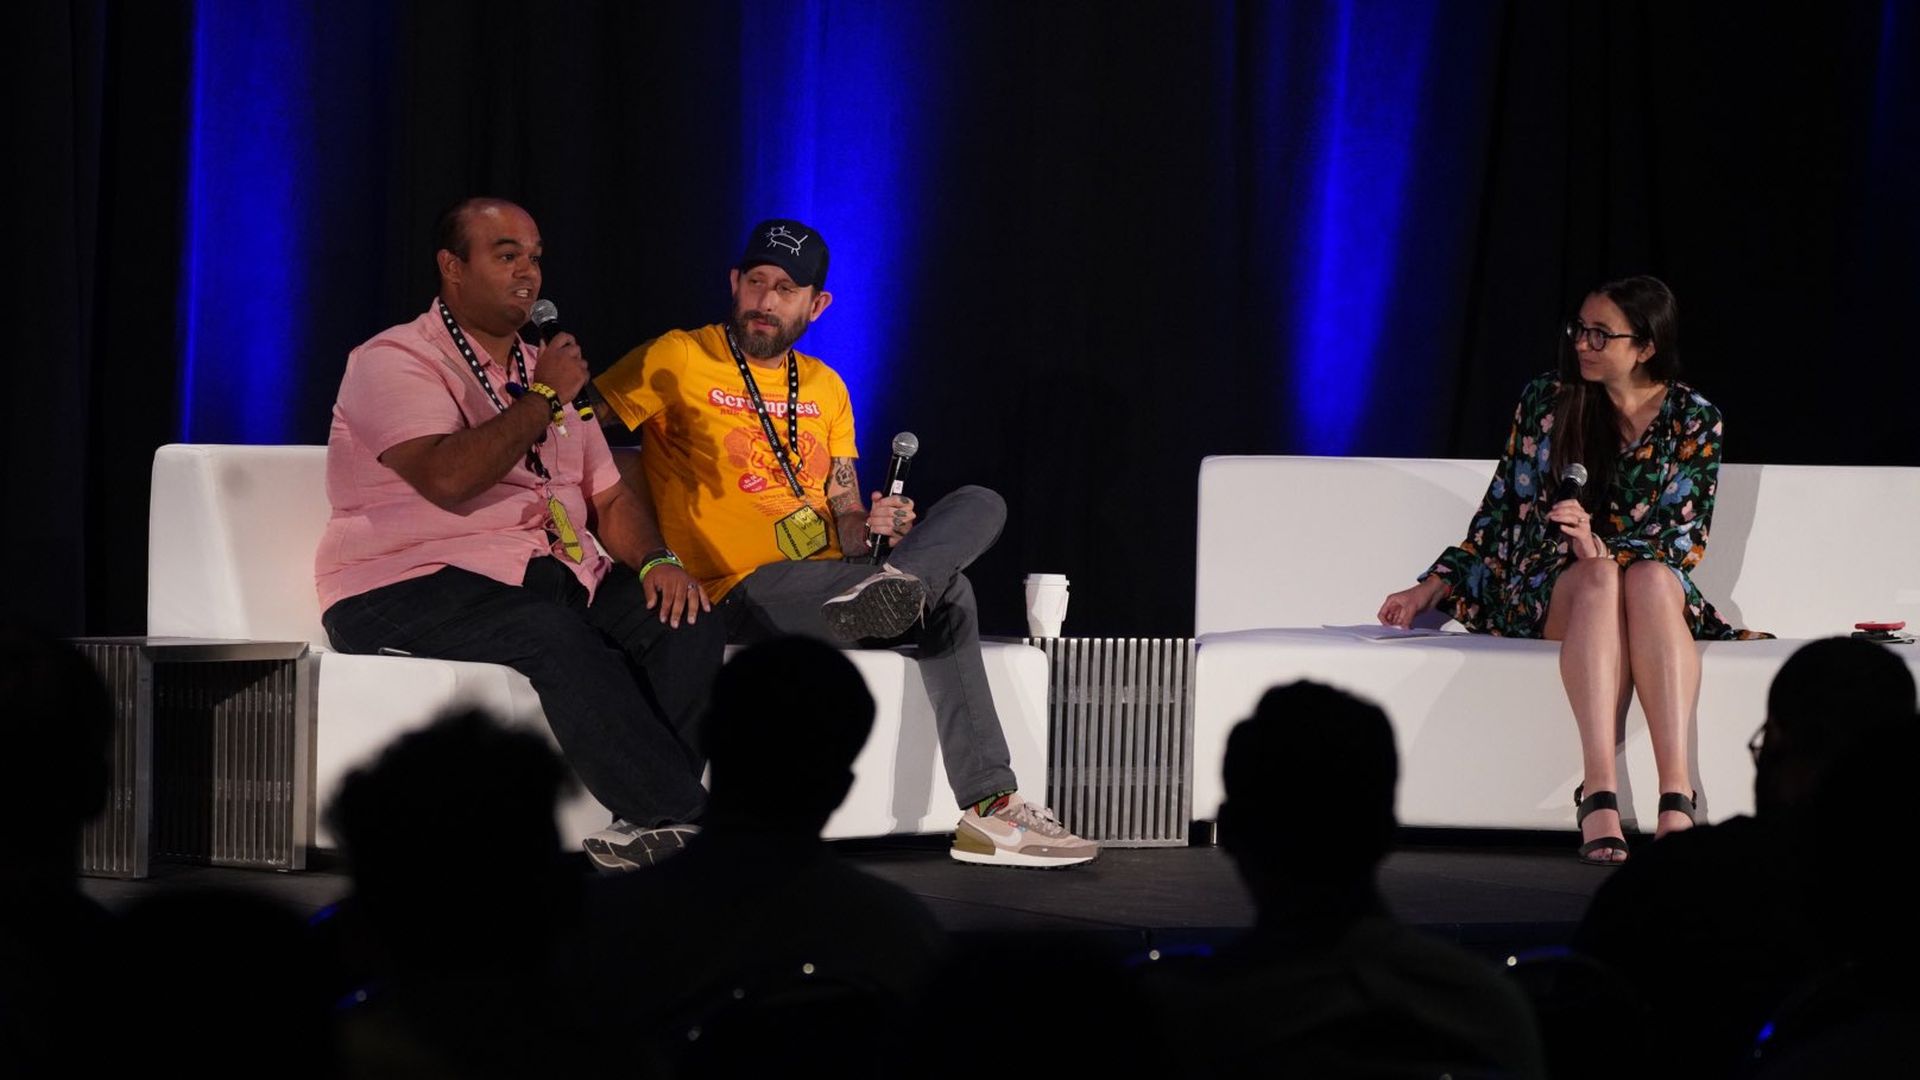 A.J. Feliciano (Head of The Roost - Rooster Teeth); Geoff Ramsey (Co-founder at Rooster Teeth); Kerry Flynn (Media Deals Reporter, Axios Pro at Axios) at VidCon 2022 on June 26, 2022.